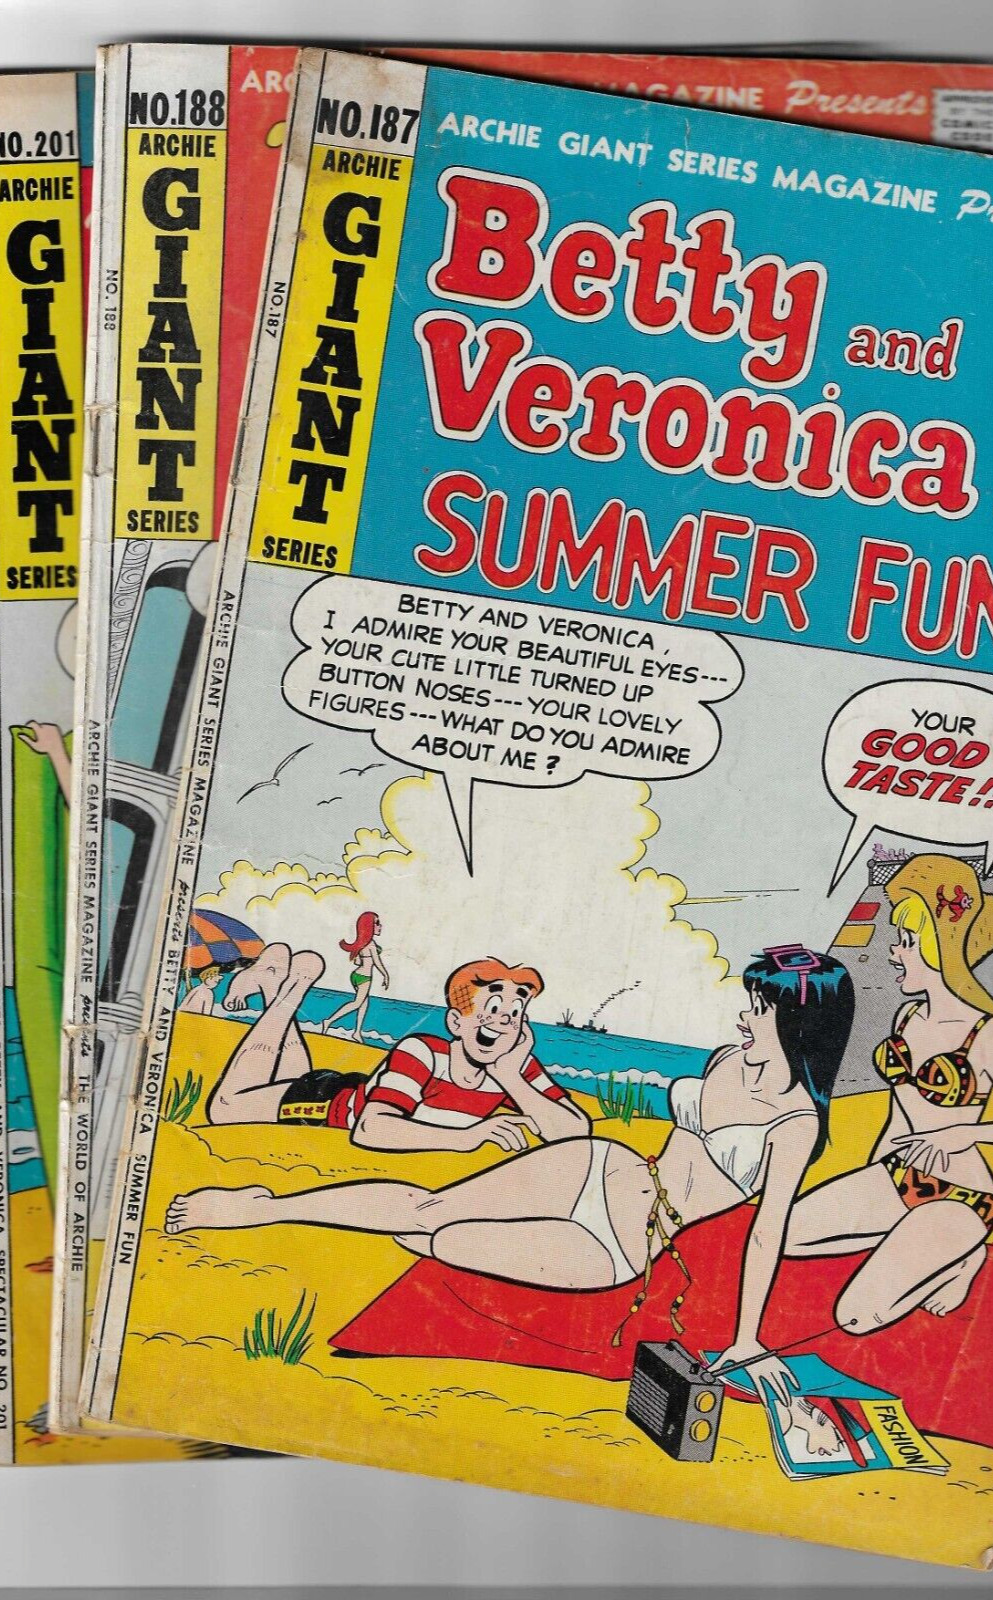 ARCHIE GIANT SERIES 187 188 201 ~ Betty & Veronica . @1971 1972